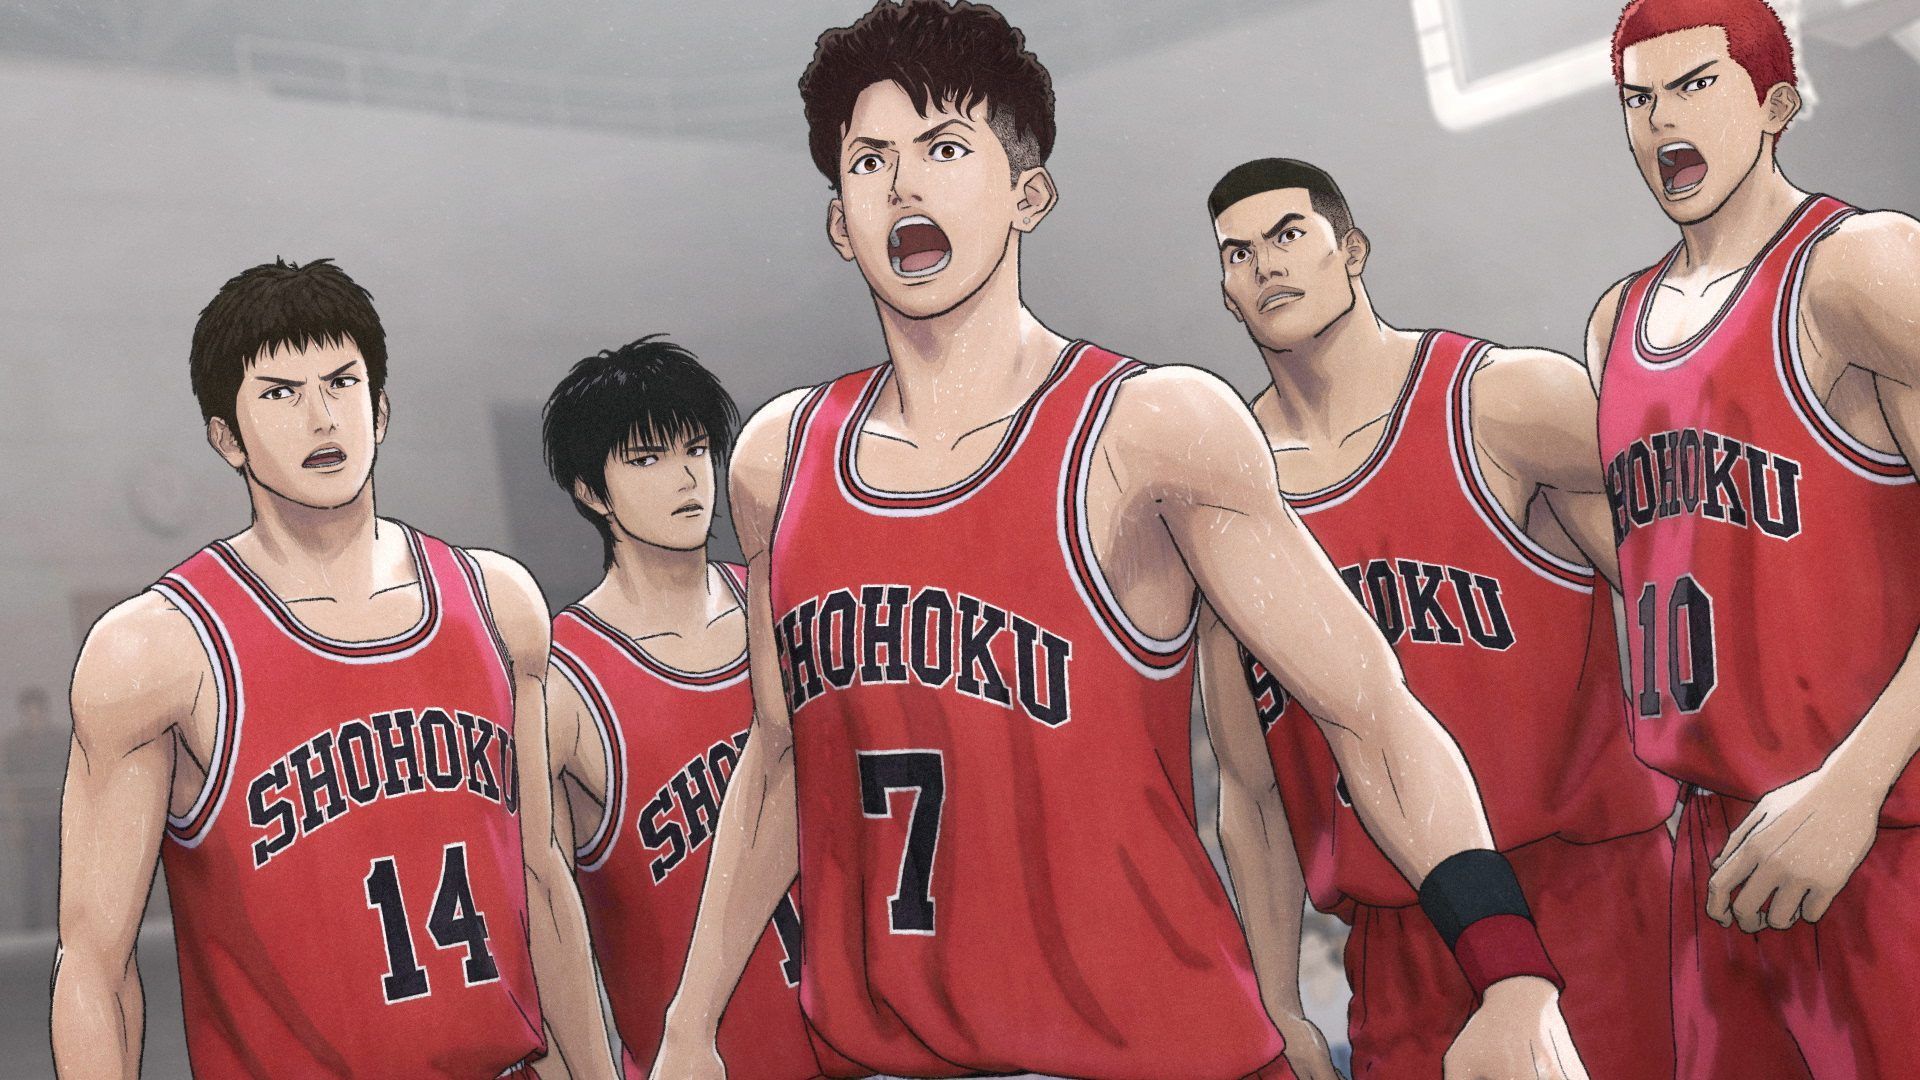 The First Slam Dunk movie